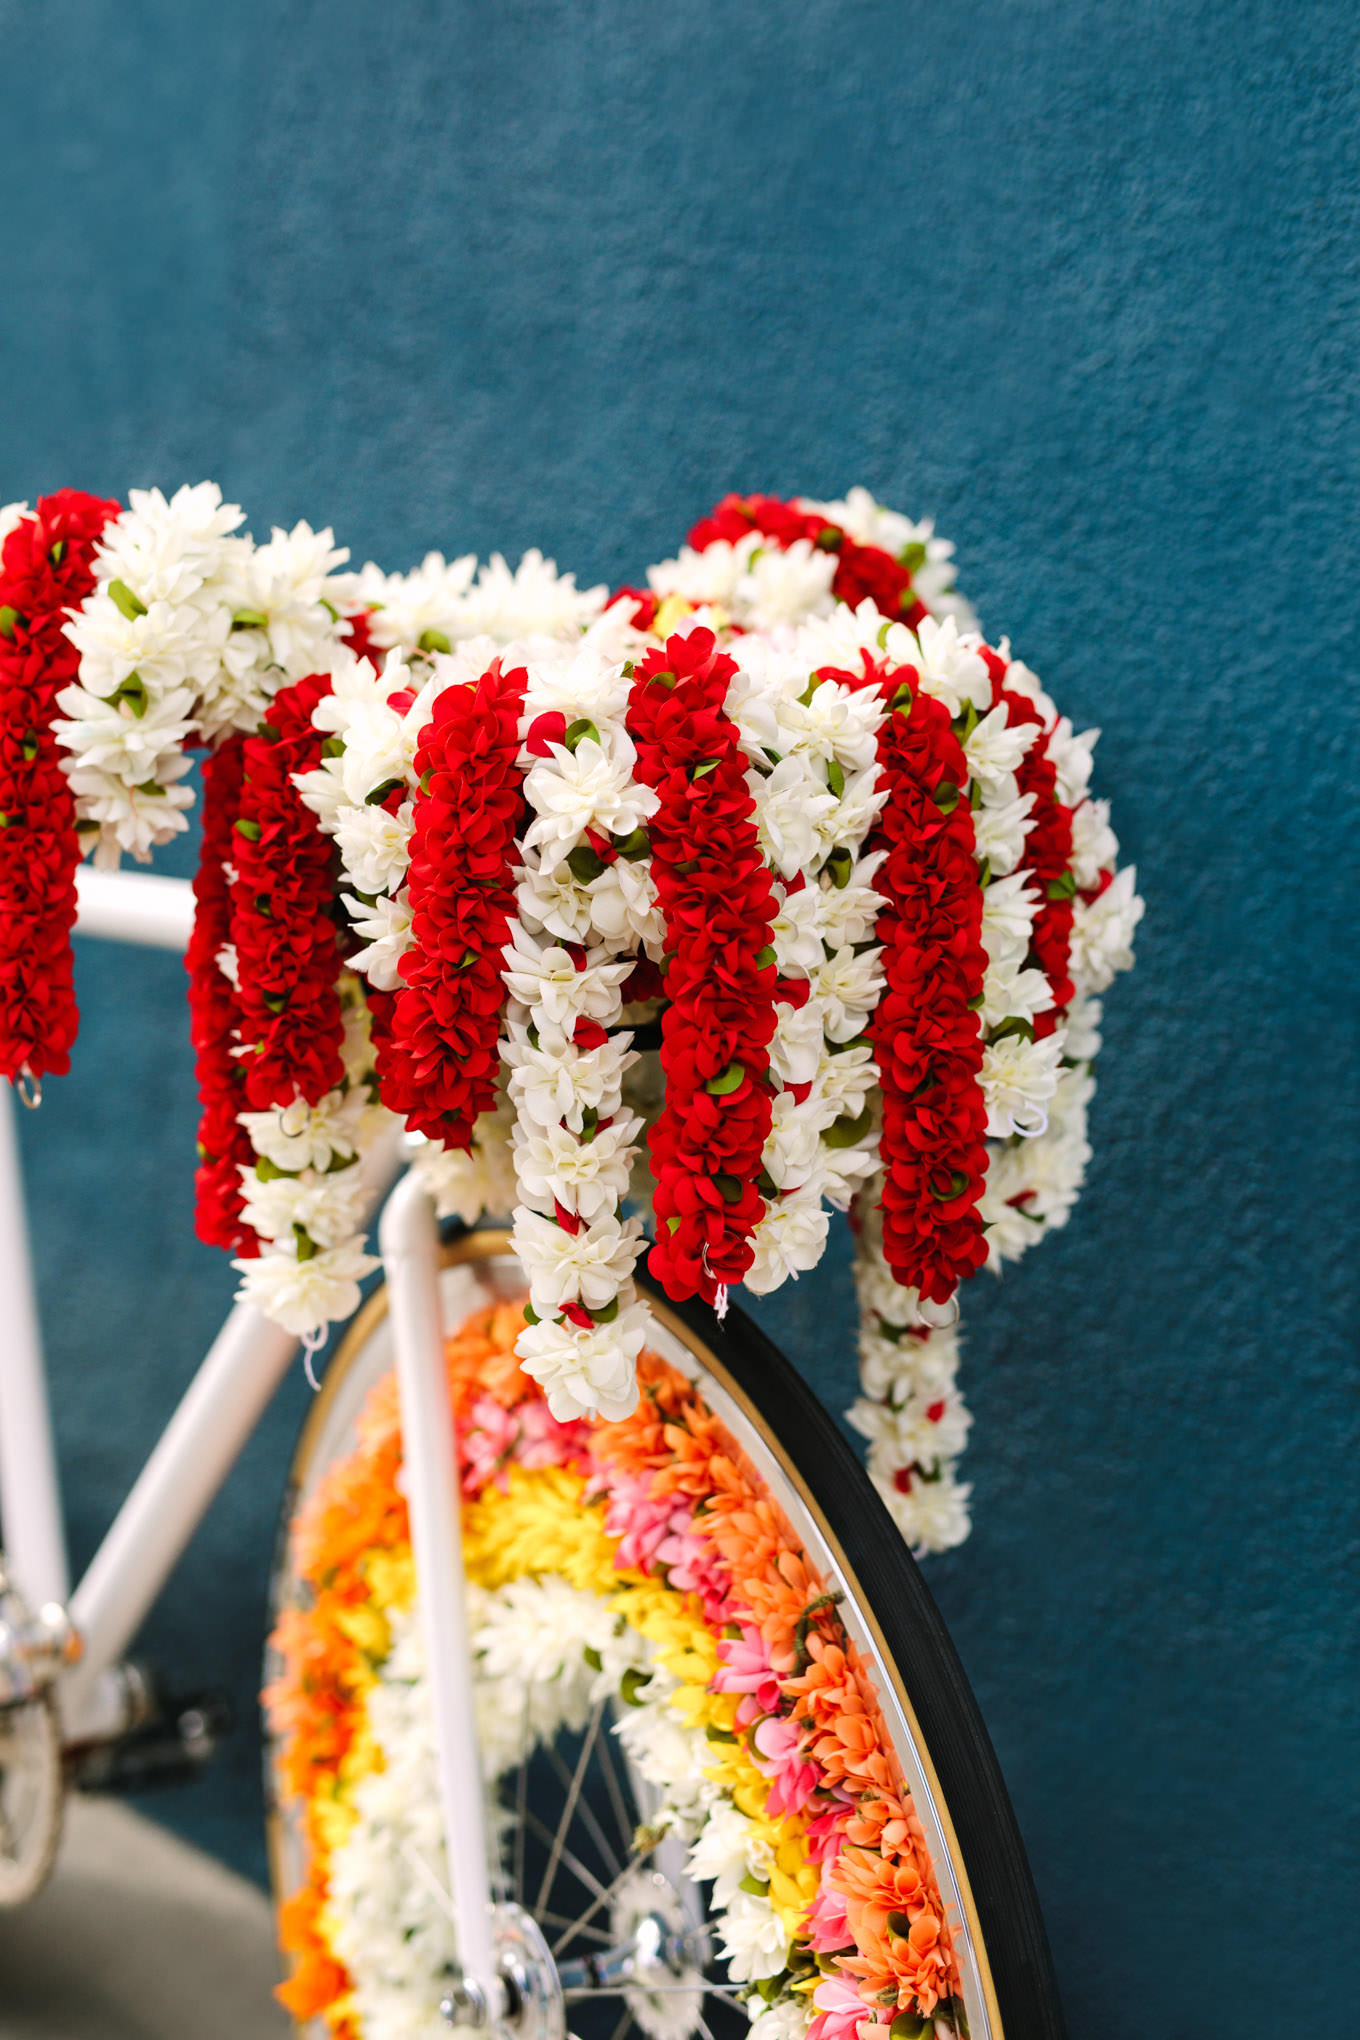 Floral Baraat bicycle on teal wall. Two Disney artists create a unique and colorful Indian Fusion wedding at The Fig House Los Angeles, featured on Green Wedding Shoes. | Colorful and elevated wedding inspiration for fun-loving couples in Southern California | #indianwedding #indianfusionwedding #thefighouse #losangeleswedding   Source: Mary Costa Photography | Los Angeles